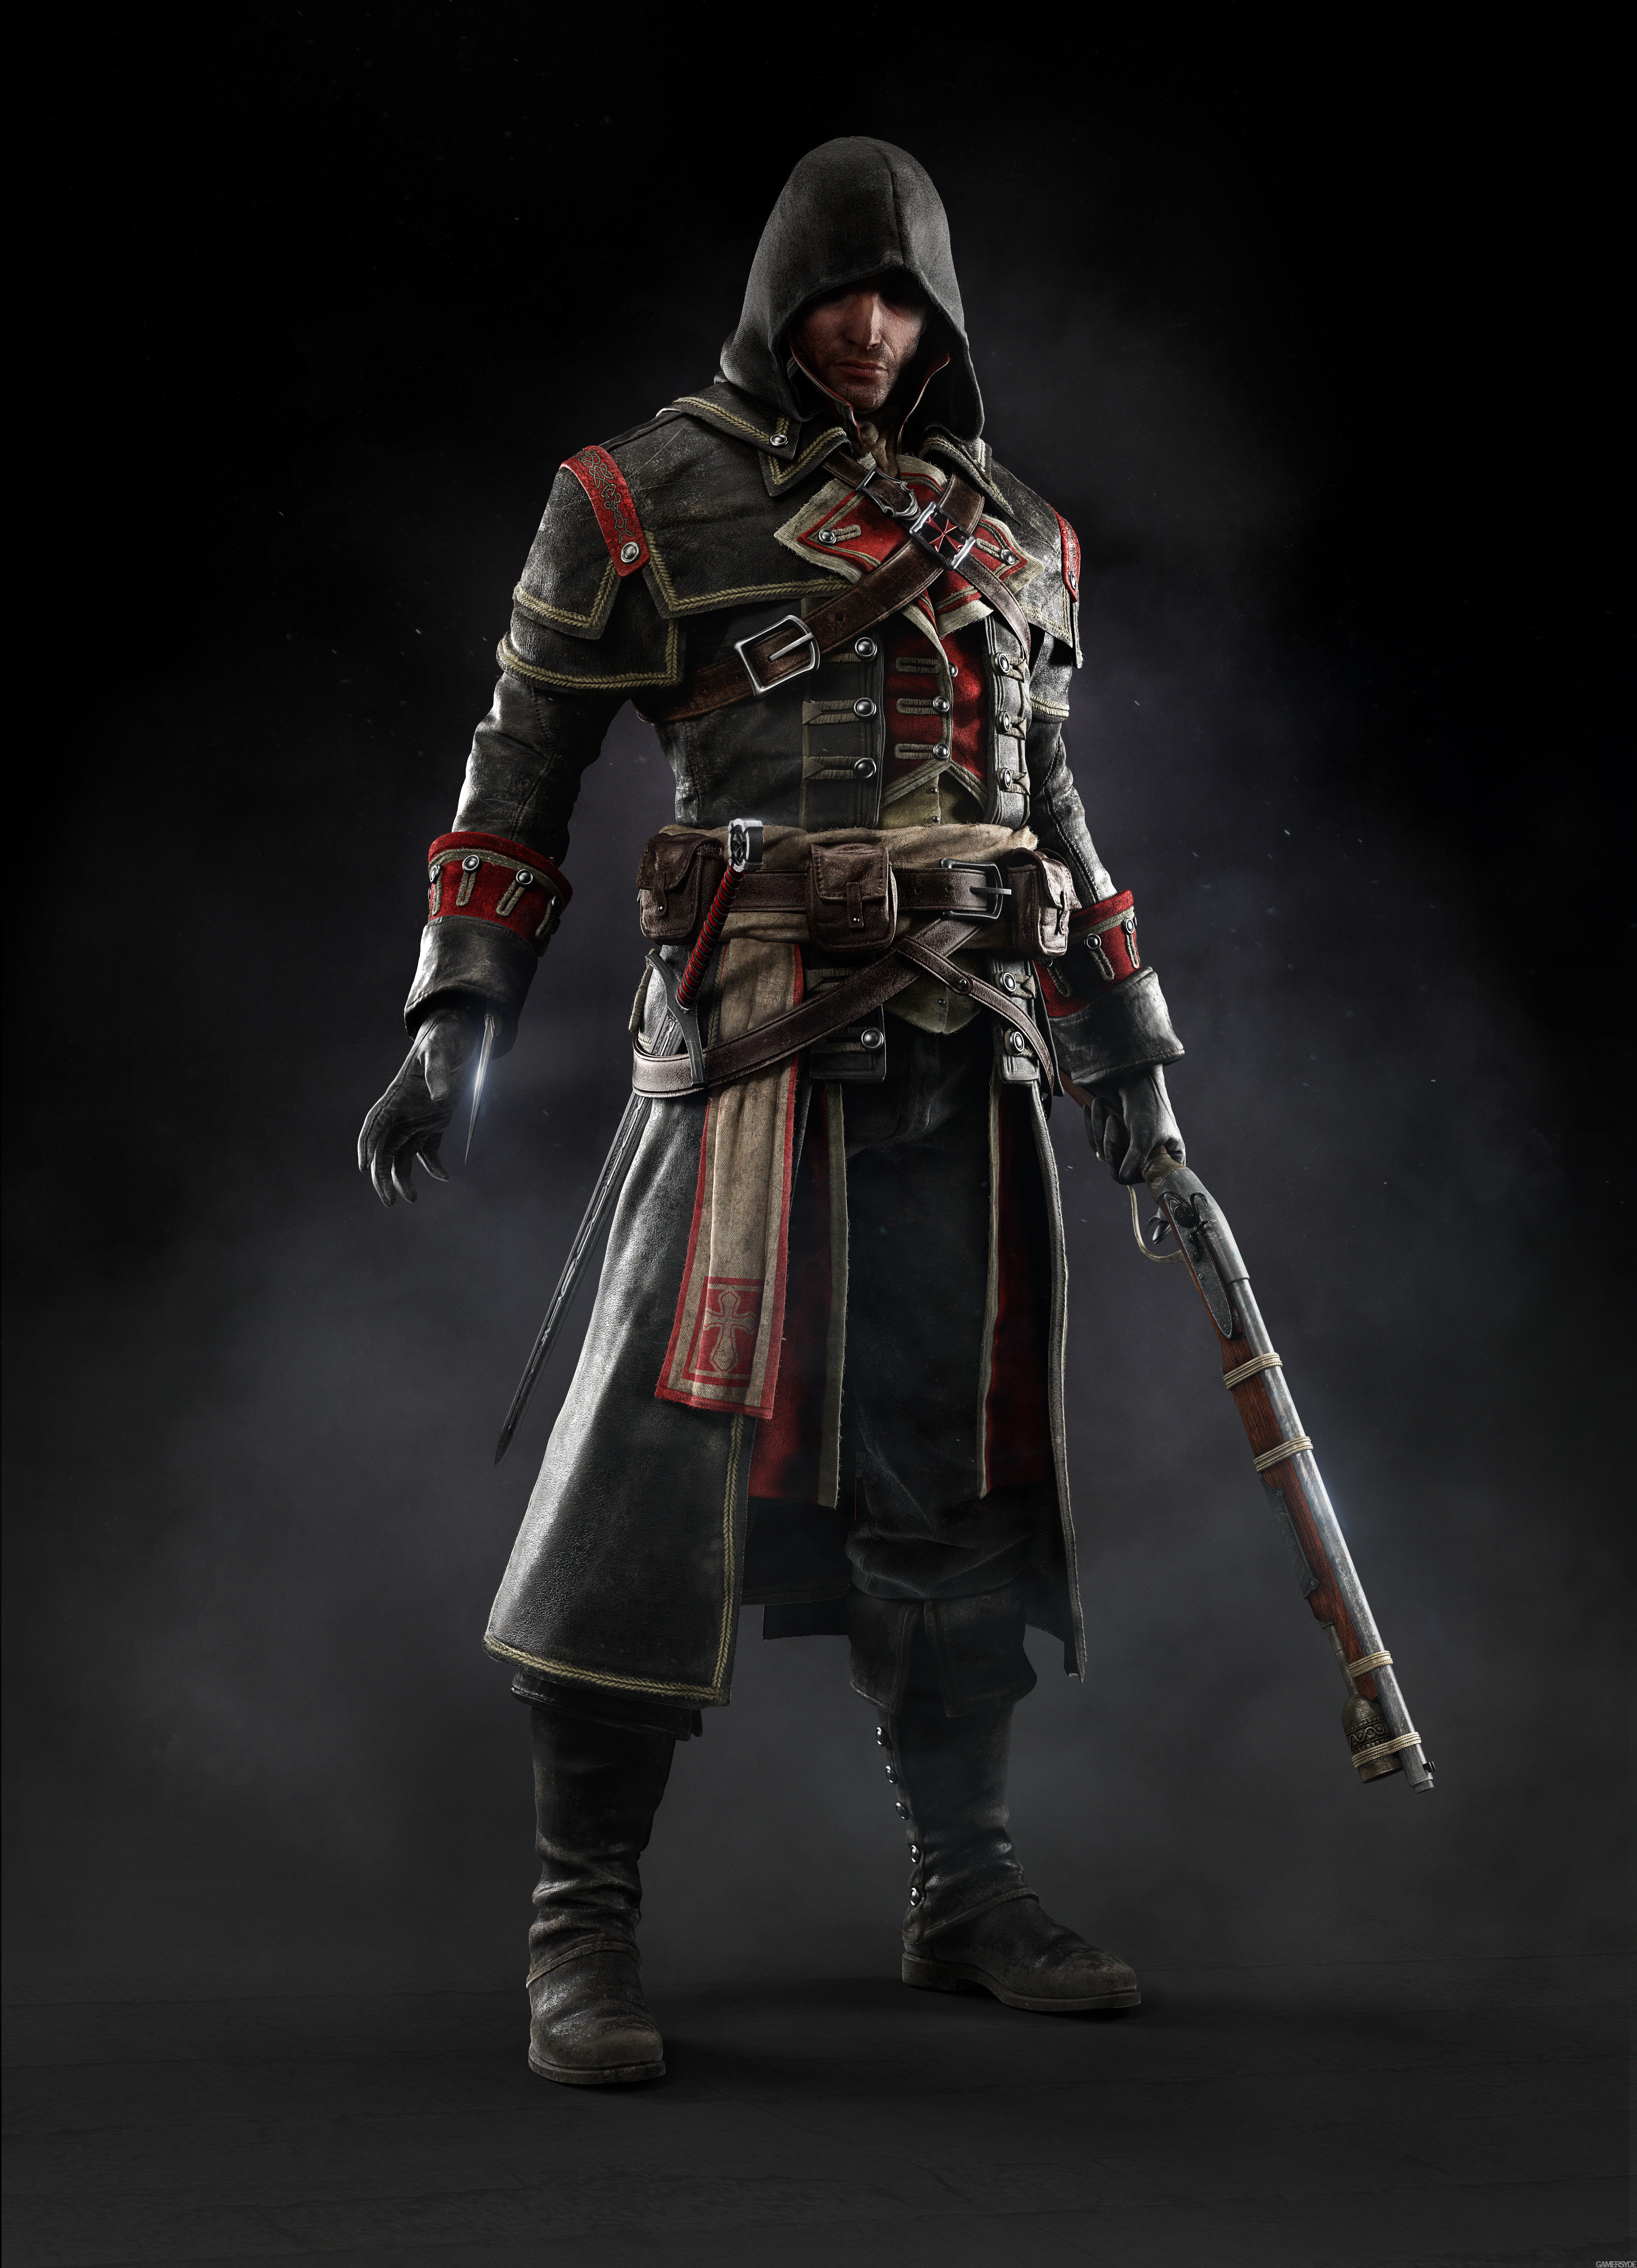 Assassin's Creed: Rogue announced - Gamersyde